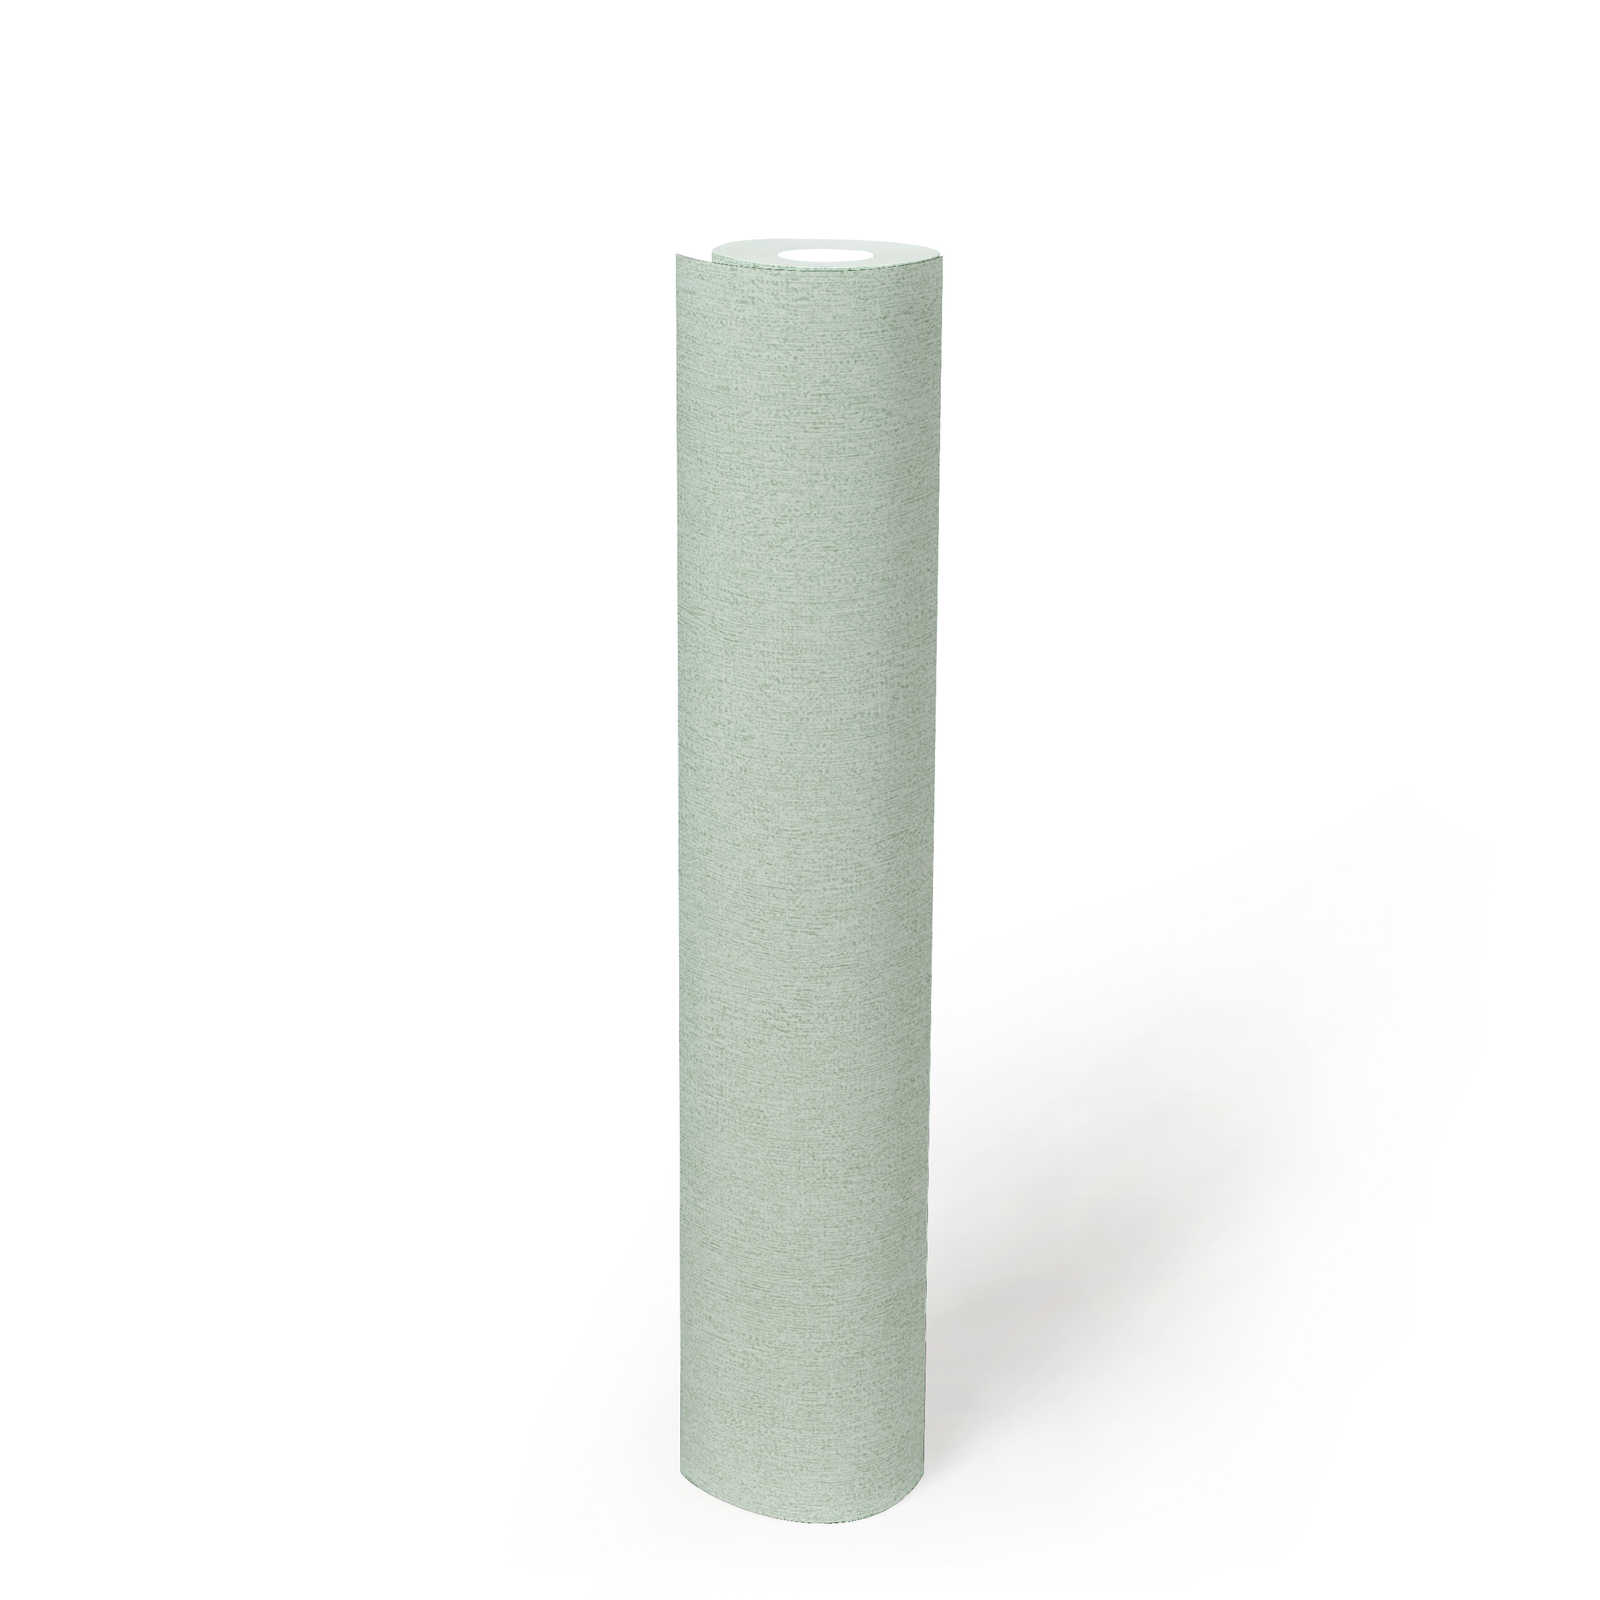             Non-woven wallpaper in matt & smooth with structure pattern - green
        